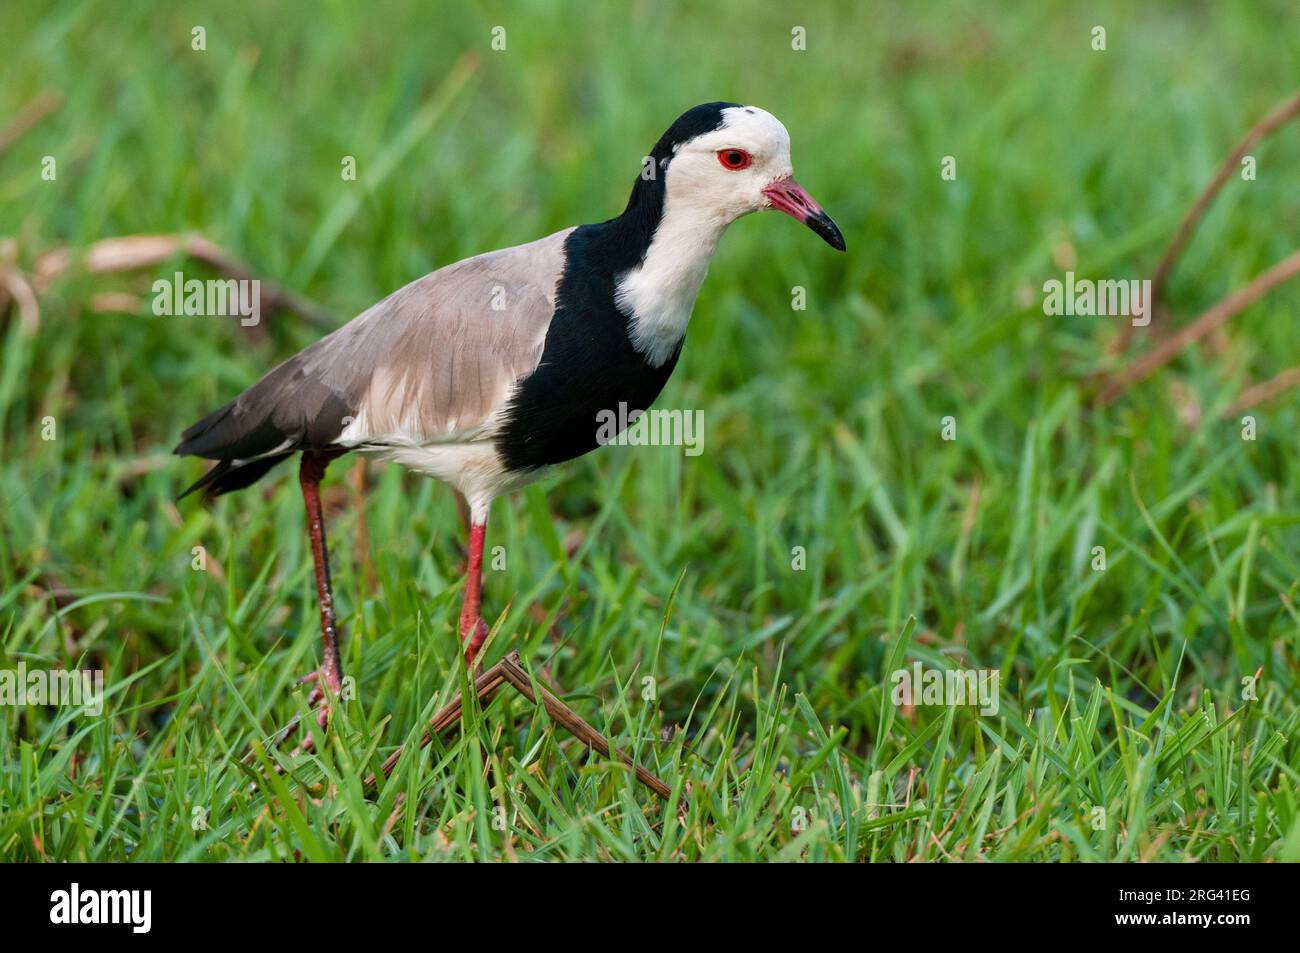 Portrait of a long-toed lapwing, Vanellus crassirostris, walking and hunting in tall grass. Chobe National Park, Botswana. Stock Photo